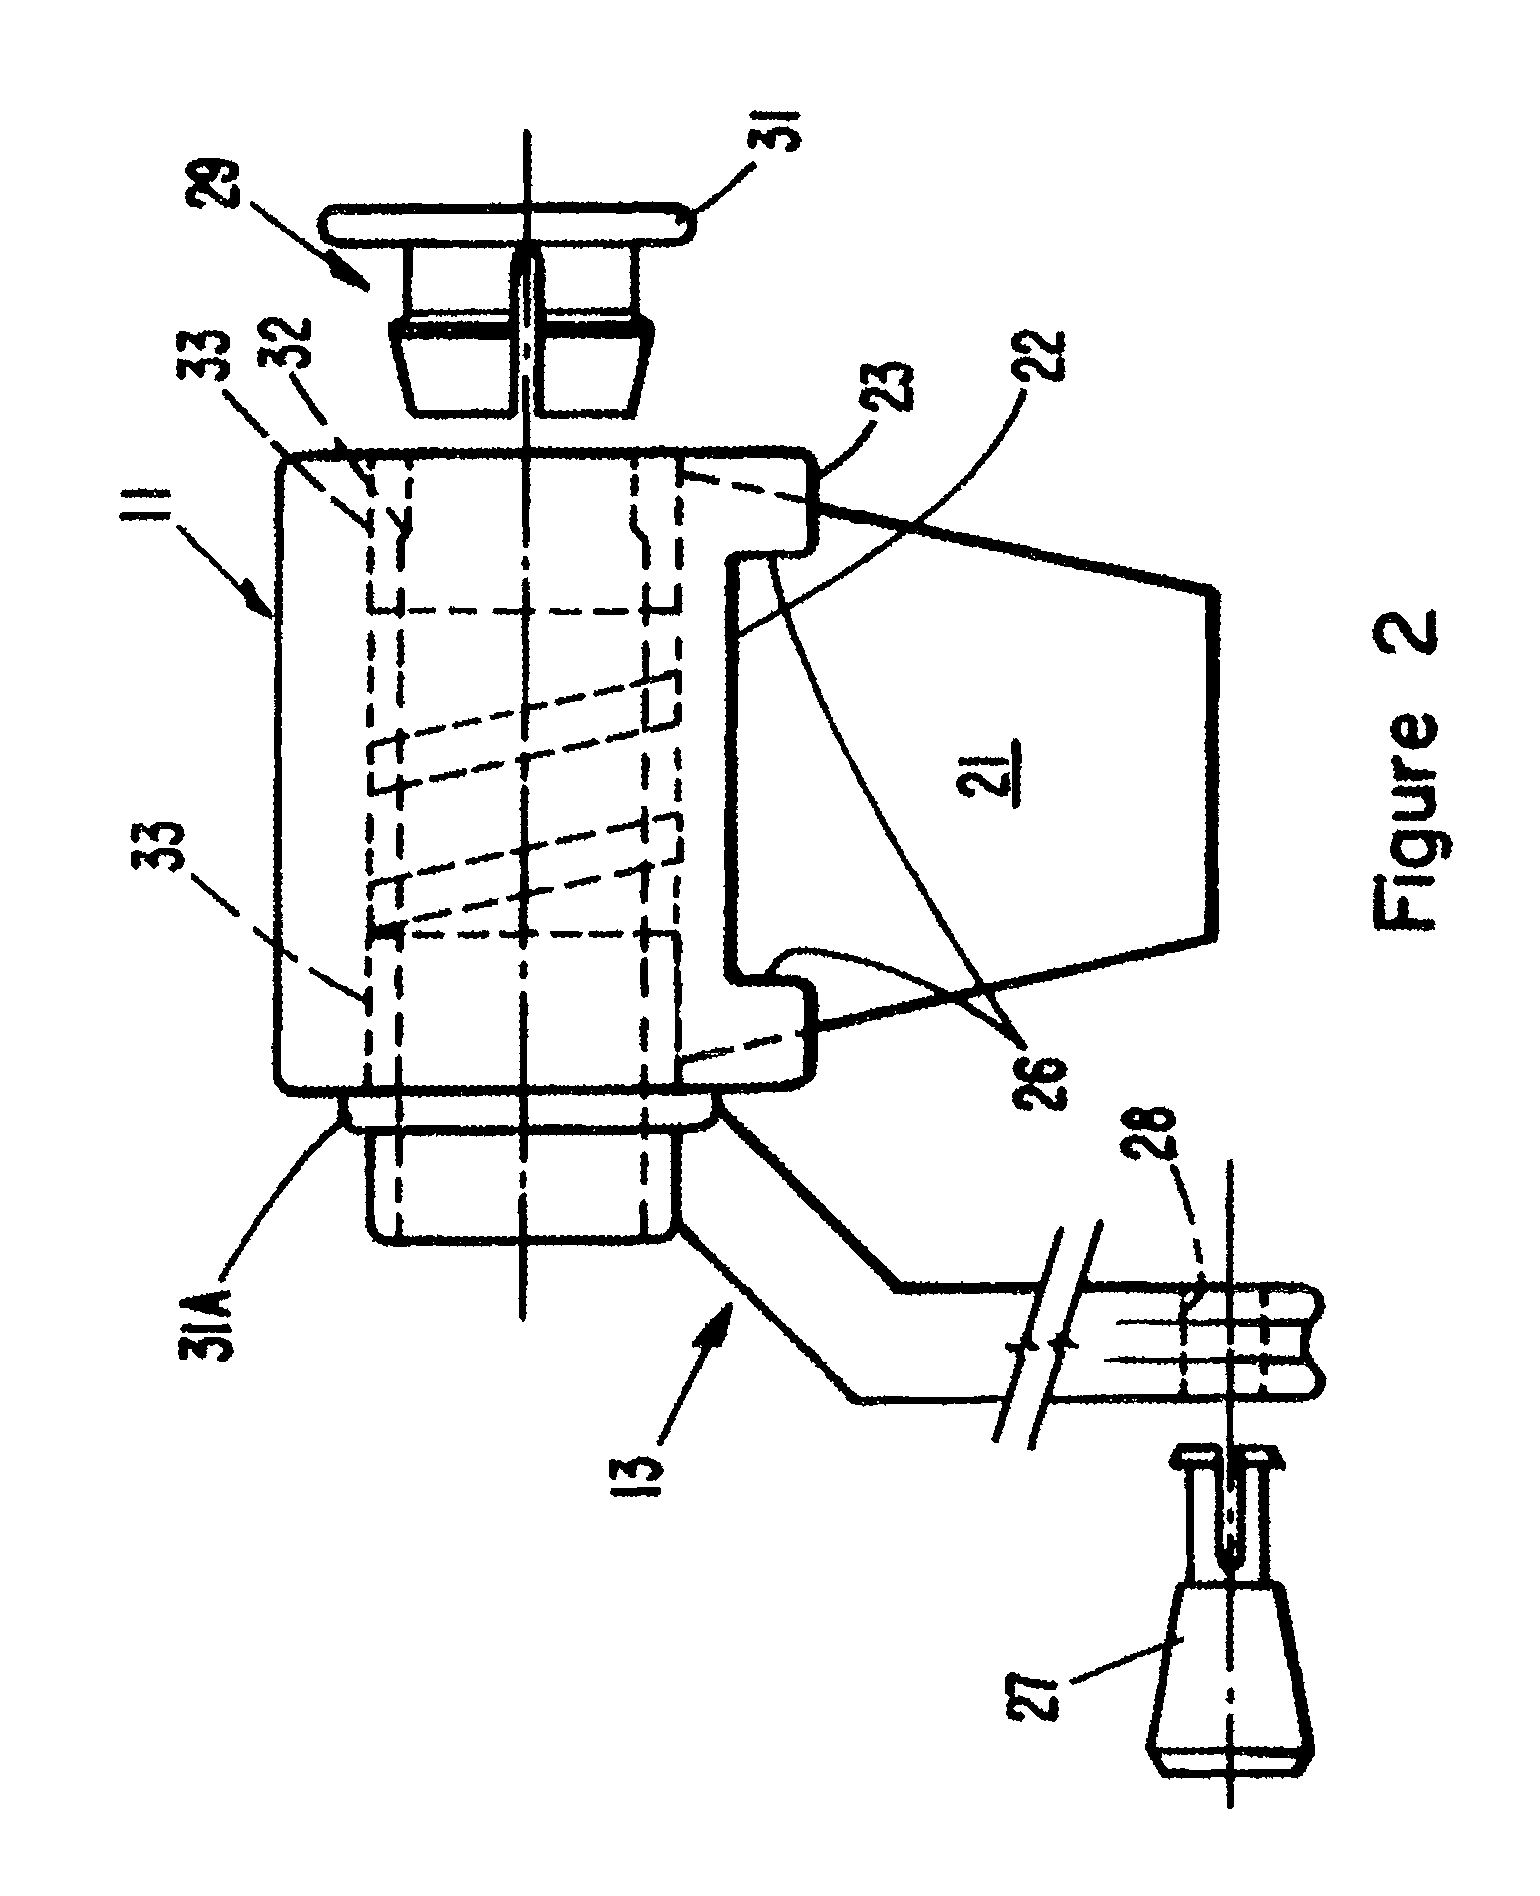 Apparatus for decomposting compressed tablets